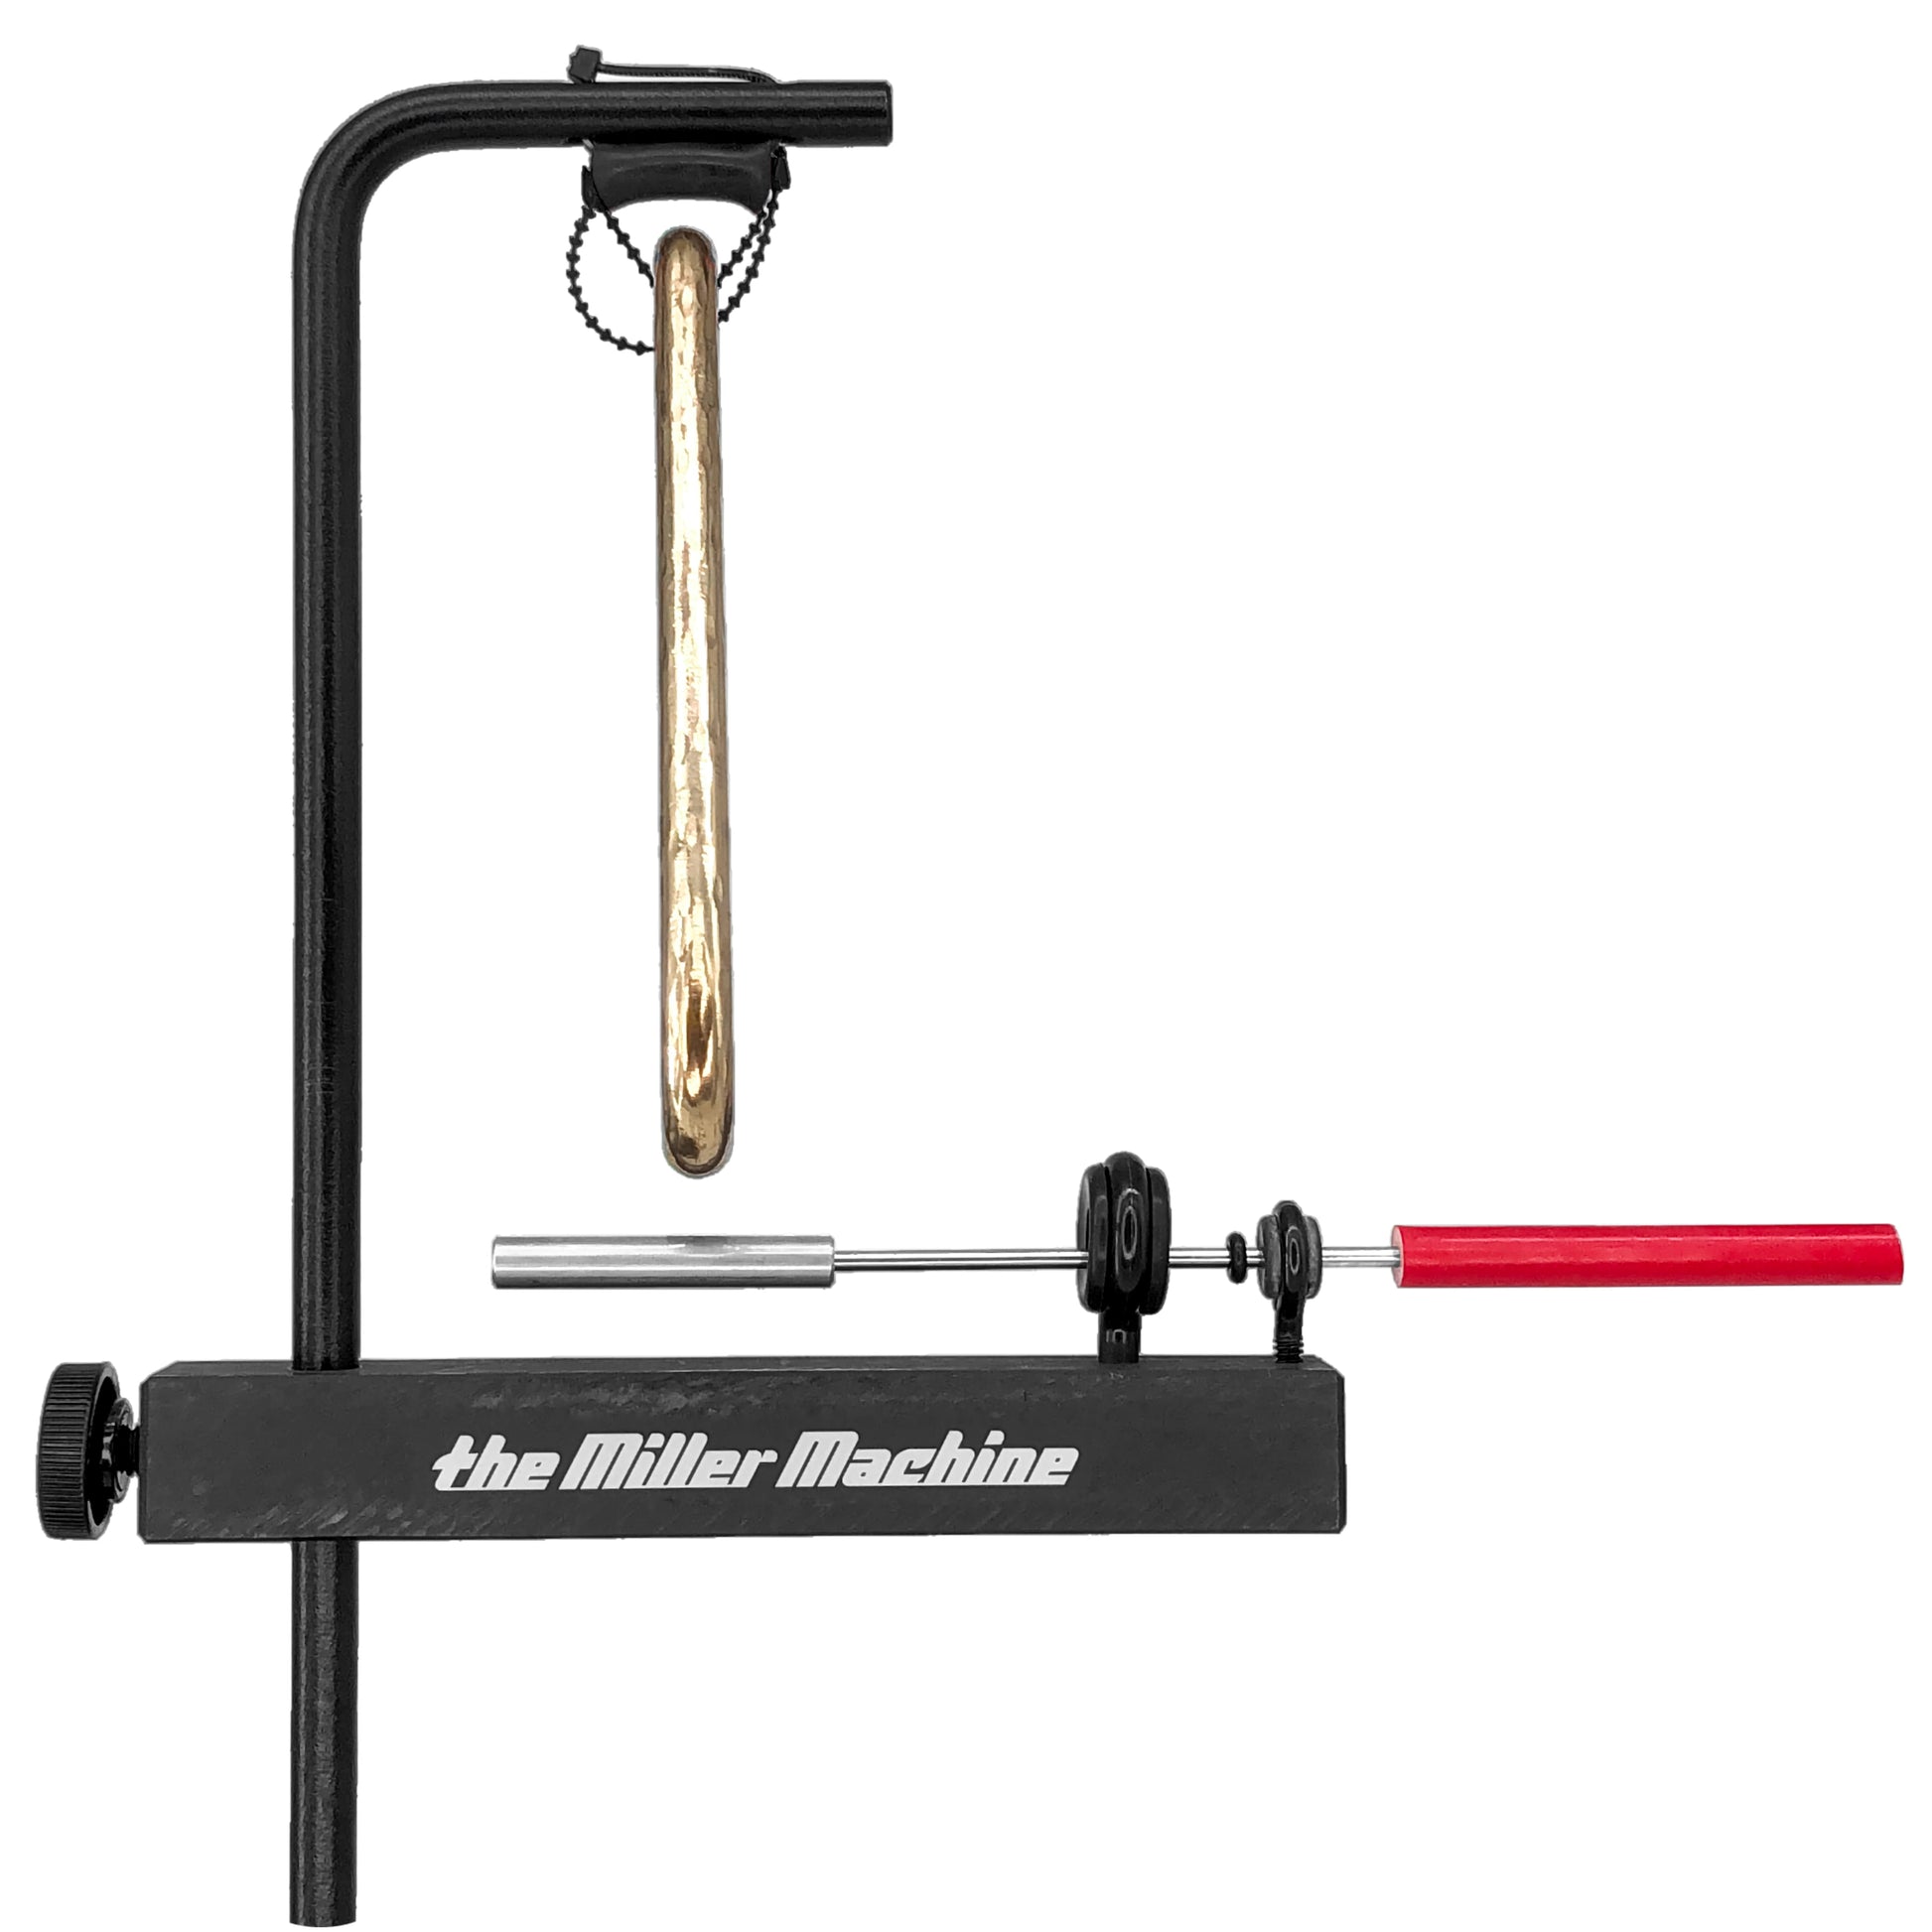 Photo of The Miller Machine, Triangle Machine with 5/16" Solid-Body Steel Beater, and redesigned Triangle Suspension mount.